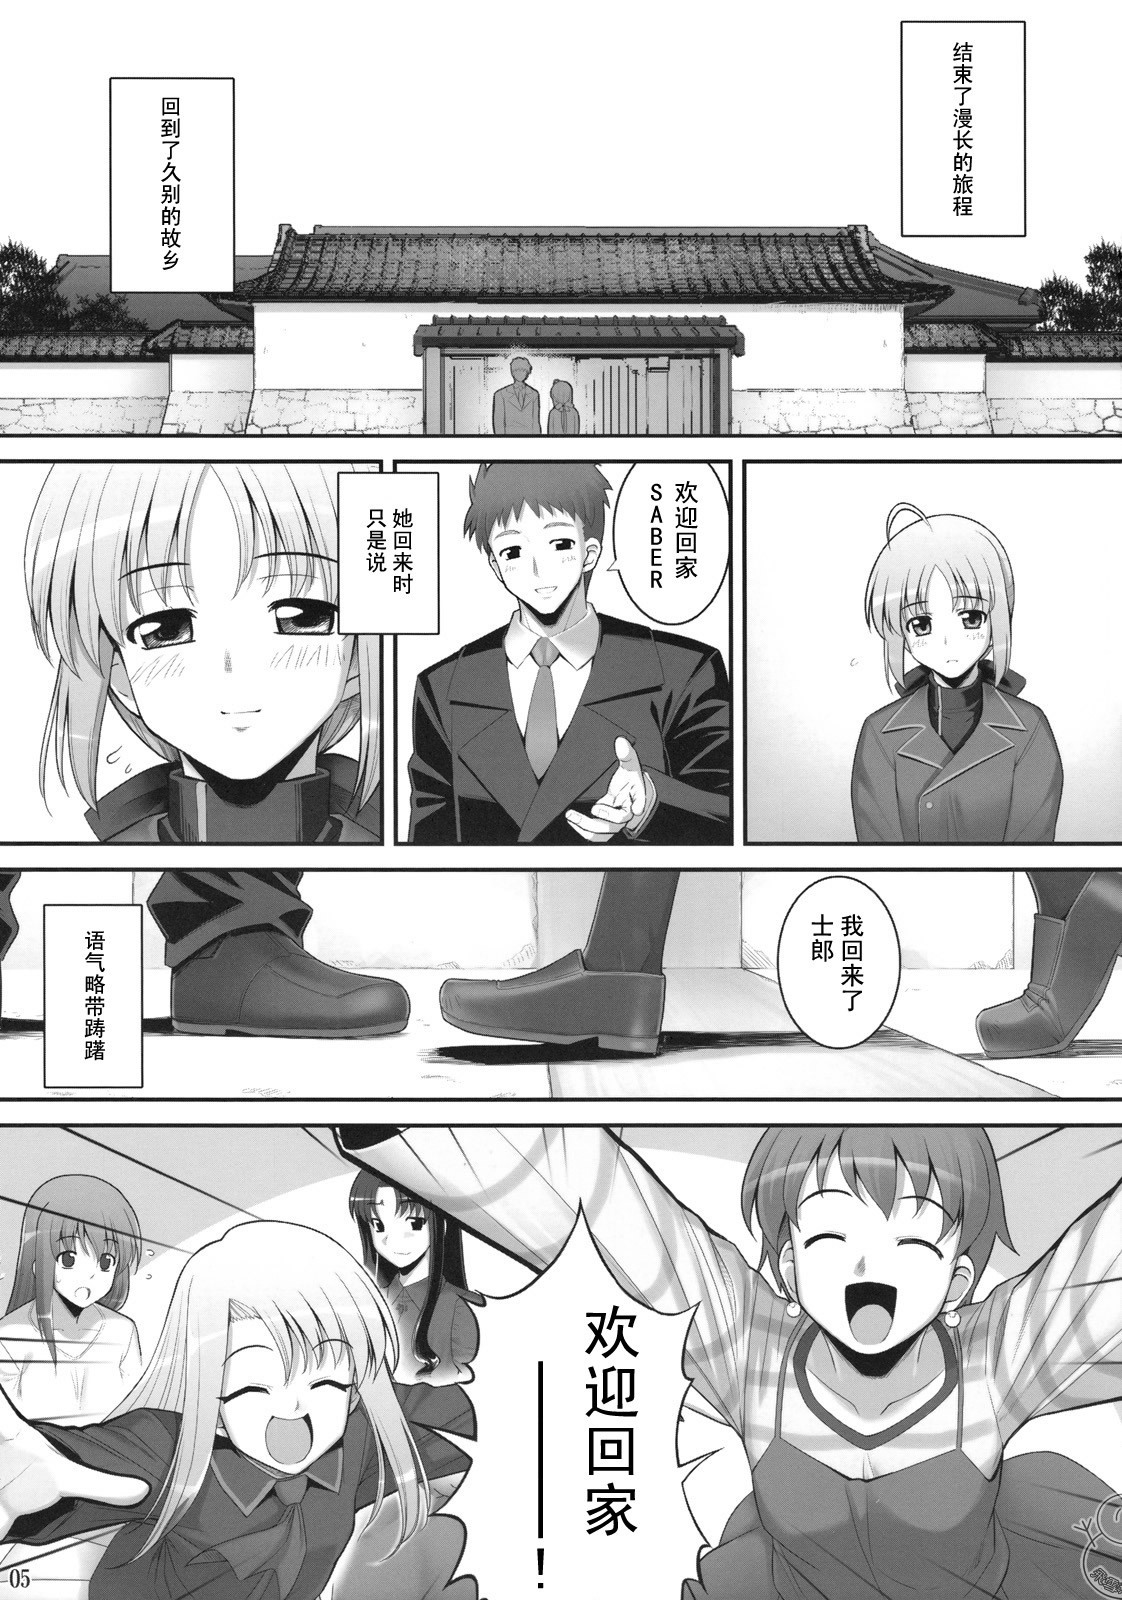 (C75) [RUBBISH Selecting Squad (Namonashi)] RE 10 (Fate/stay night) [Chinese] [飞雪汉化组] page 4 full